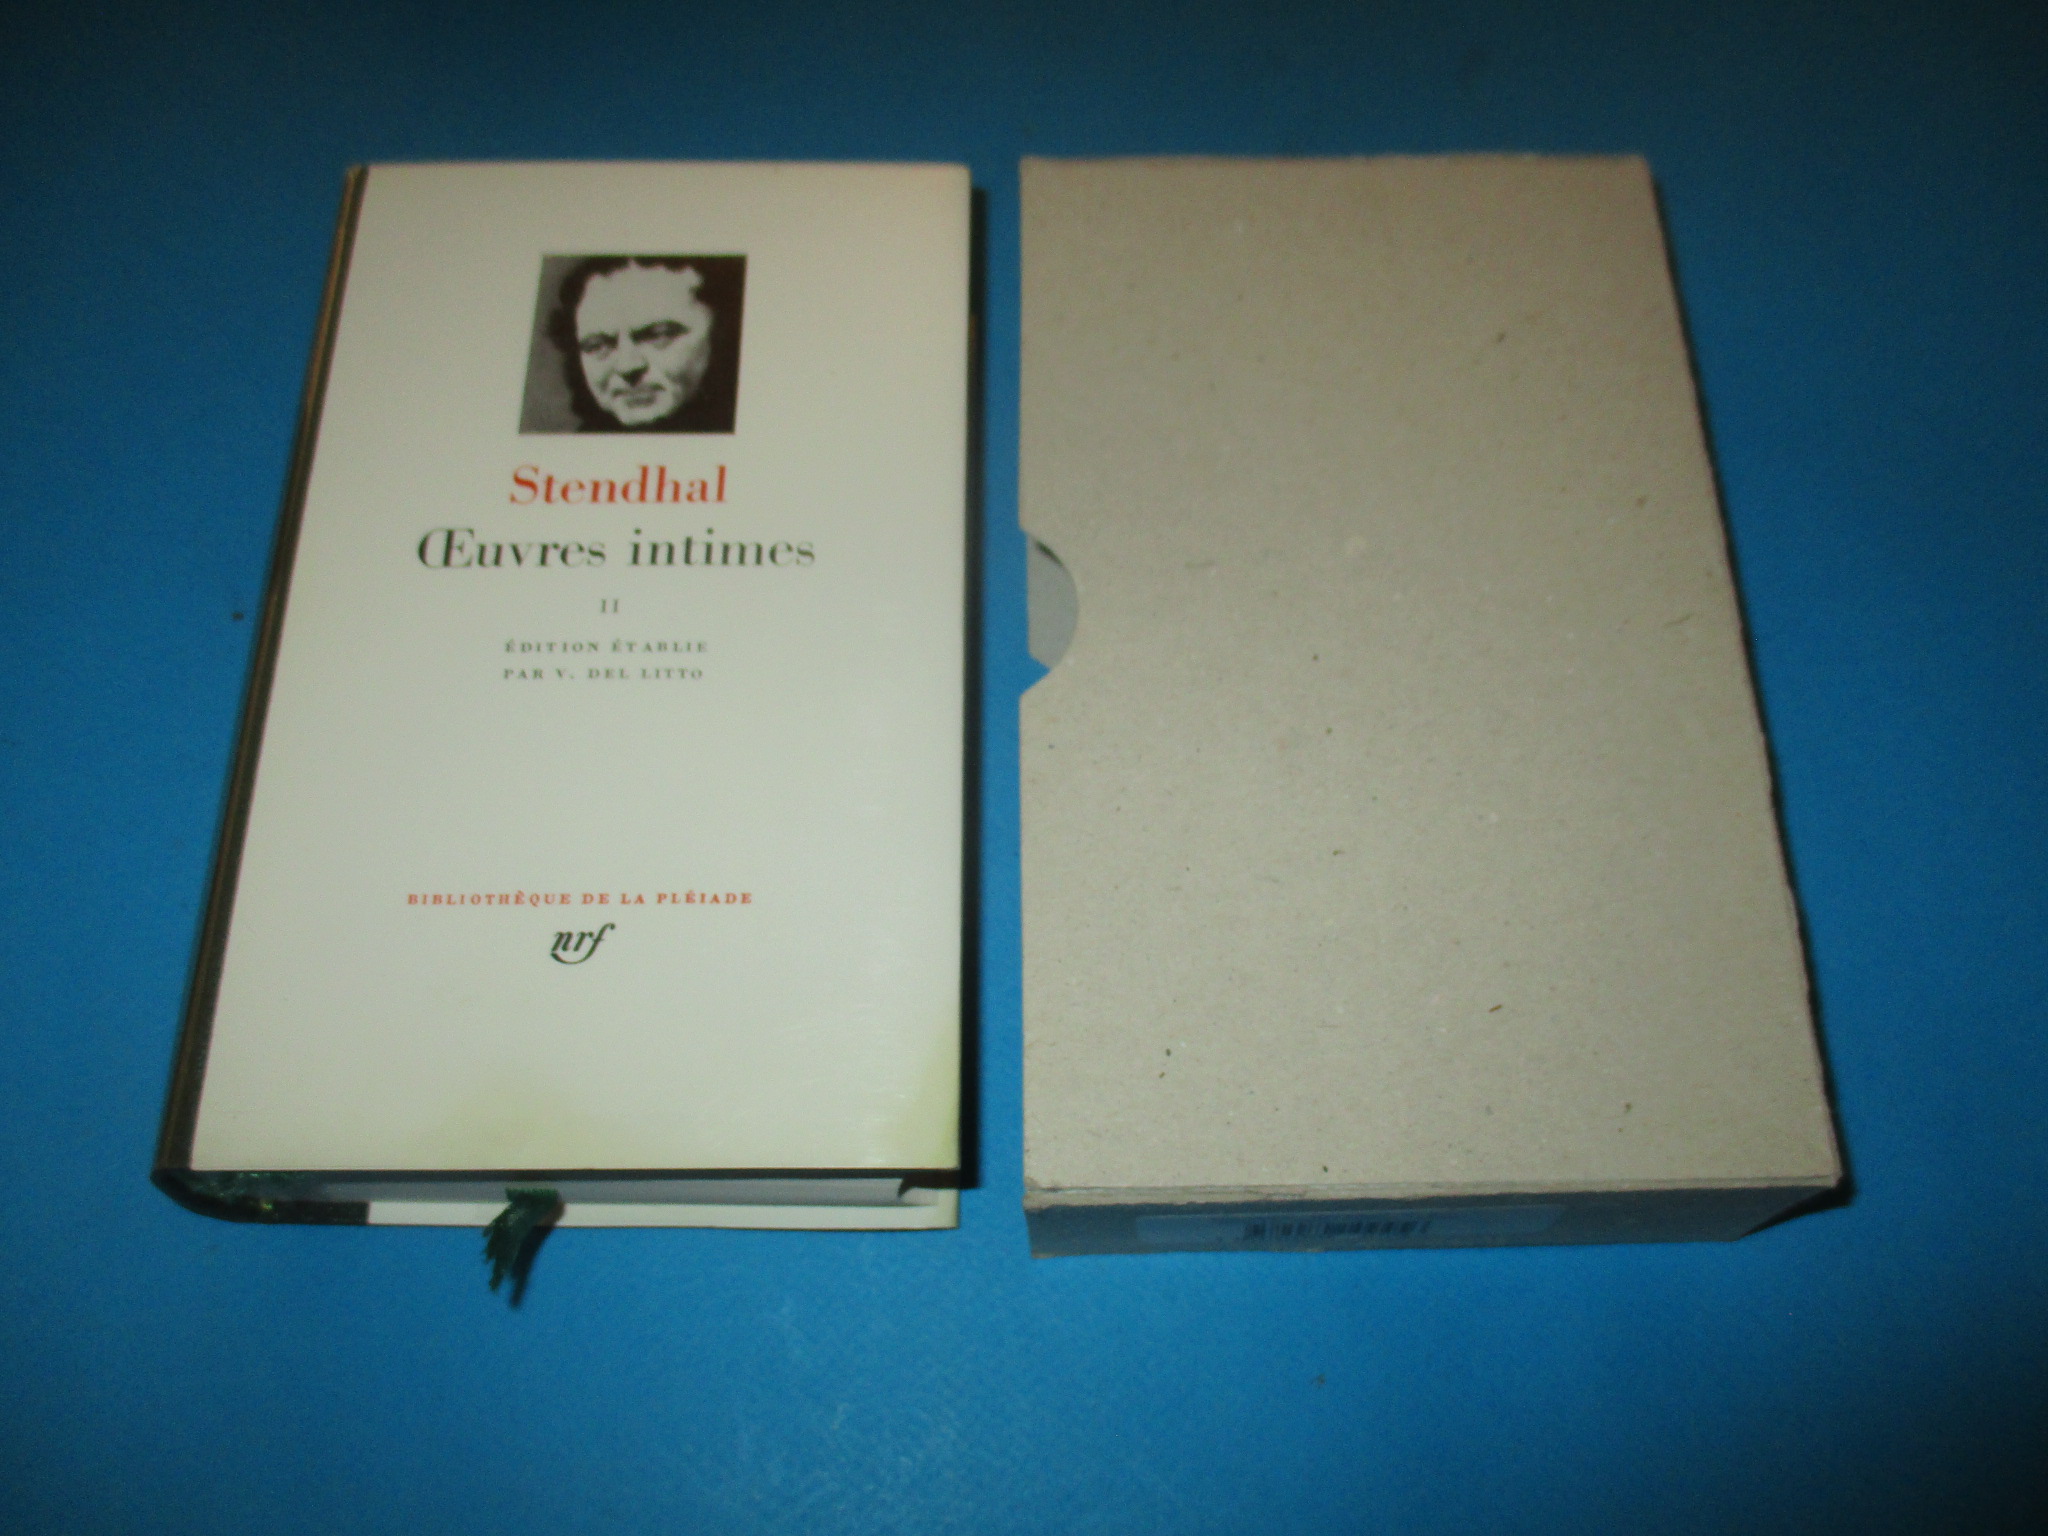 Oeuvres intimes II, Stendhal, tome 2, La Pléiade 1982